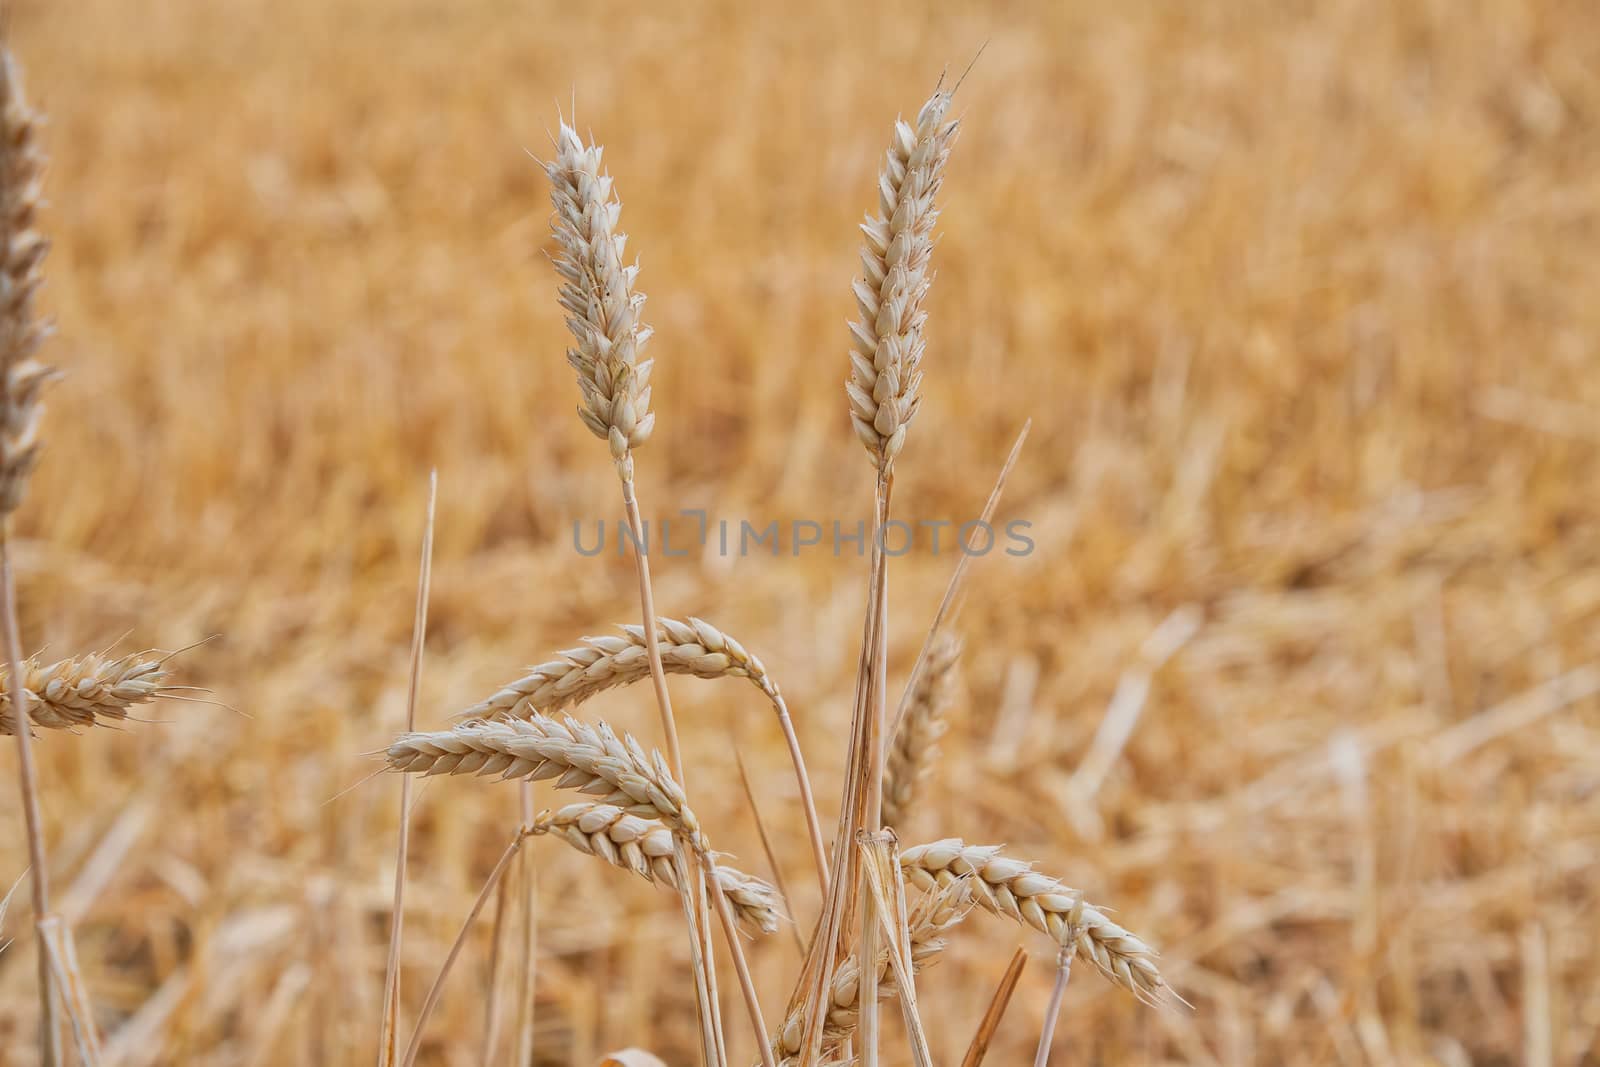 Ears of golden wheat close up growing in a field.